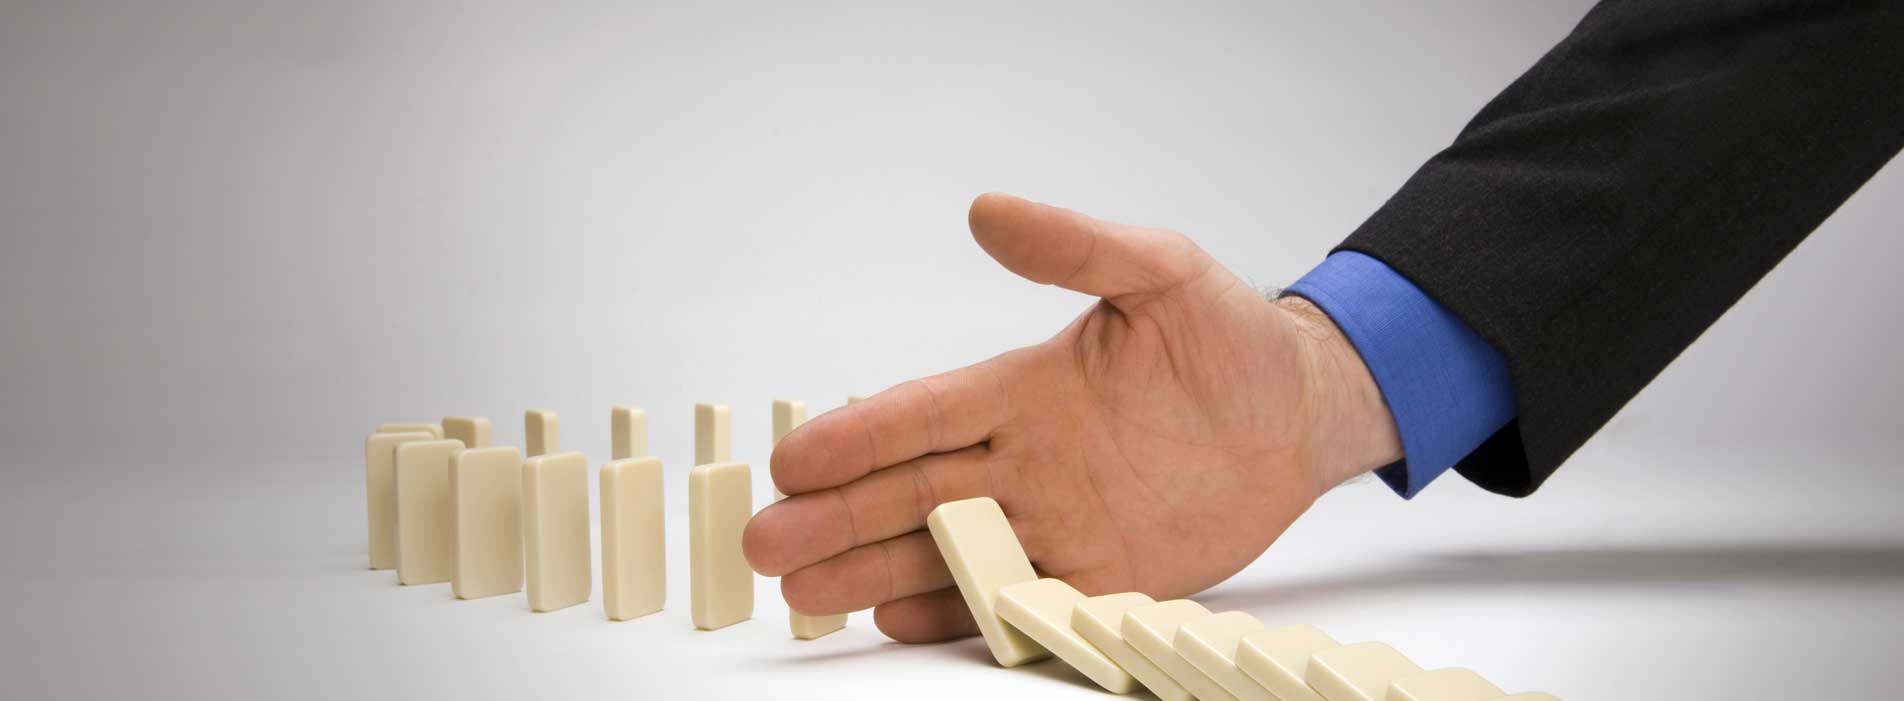 Crisis management planning is like this hand blocking more dominoes from toppling